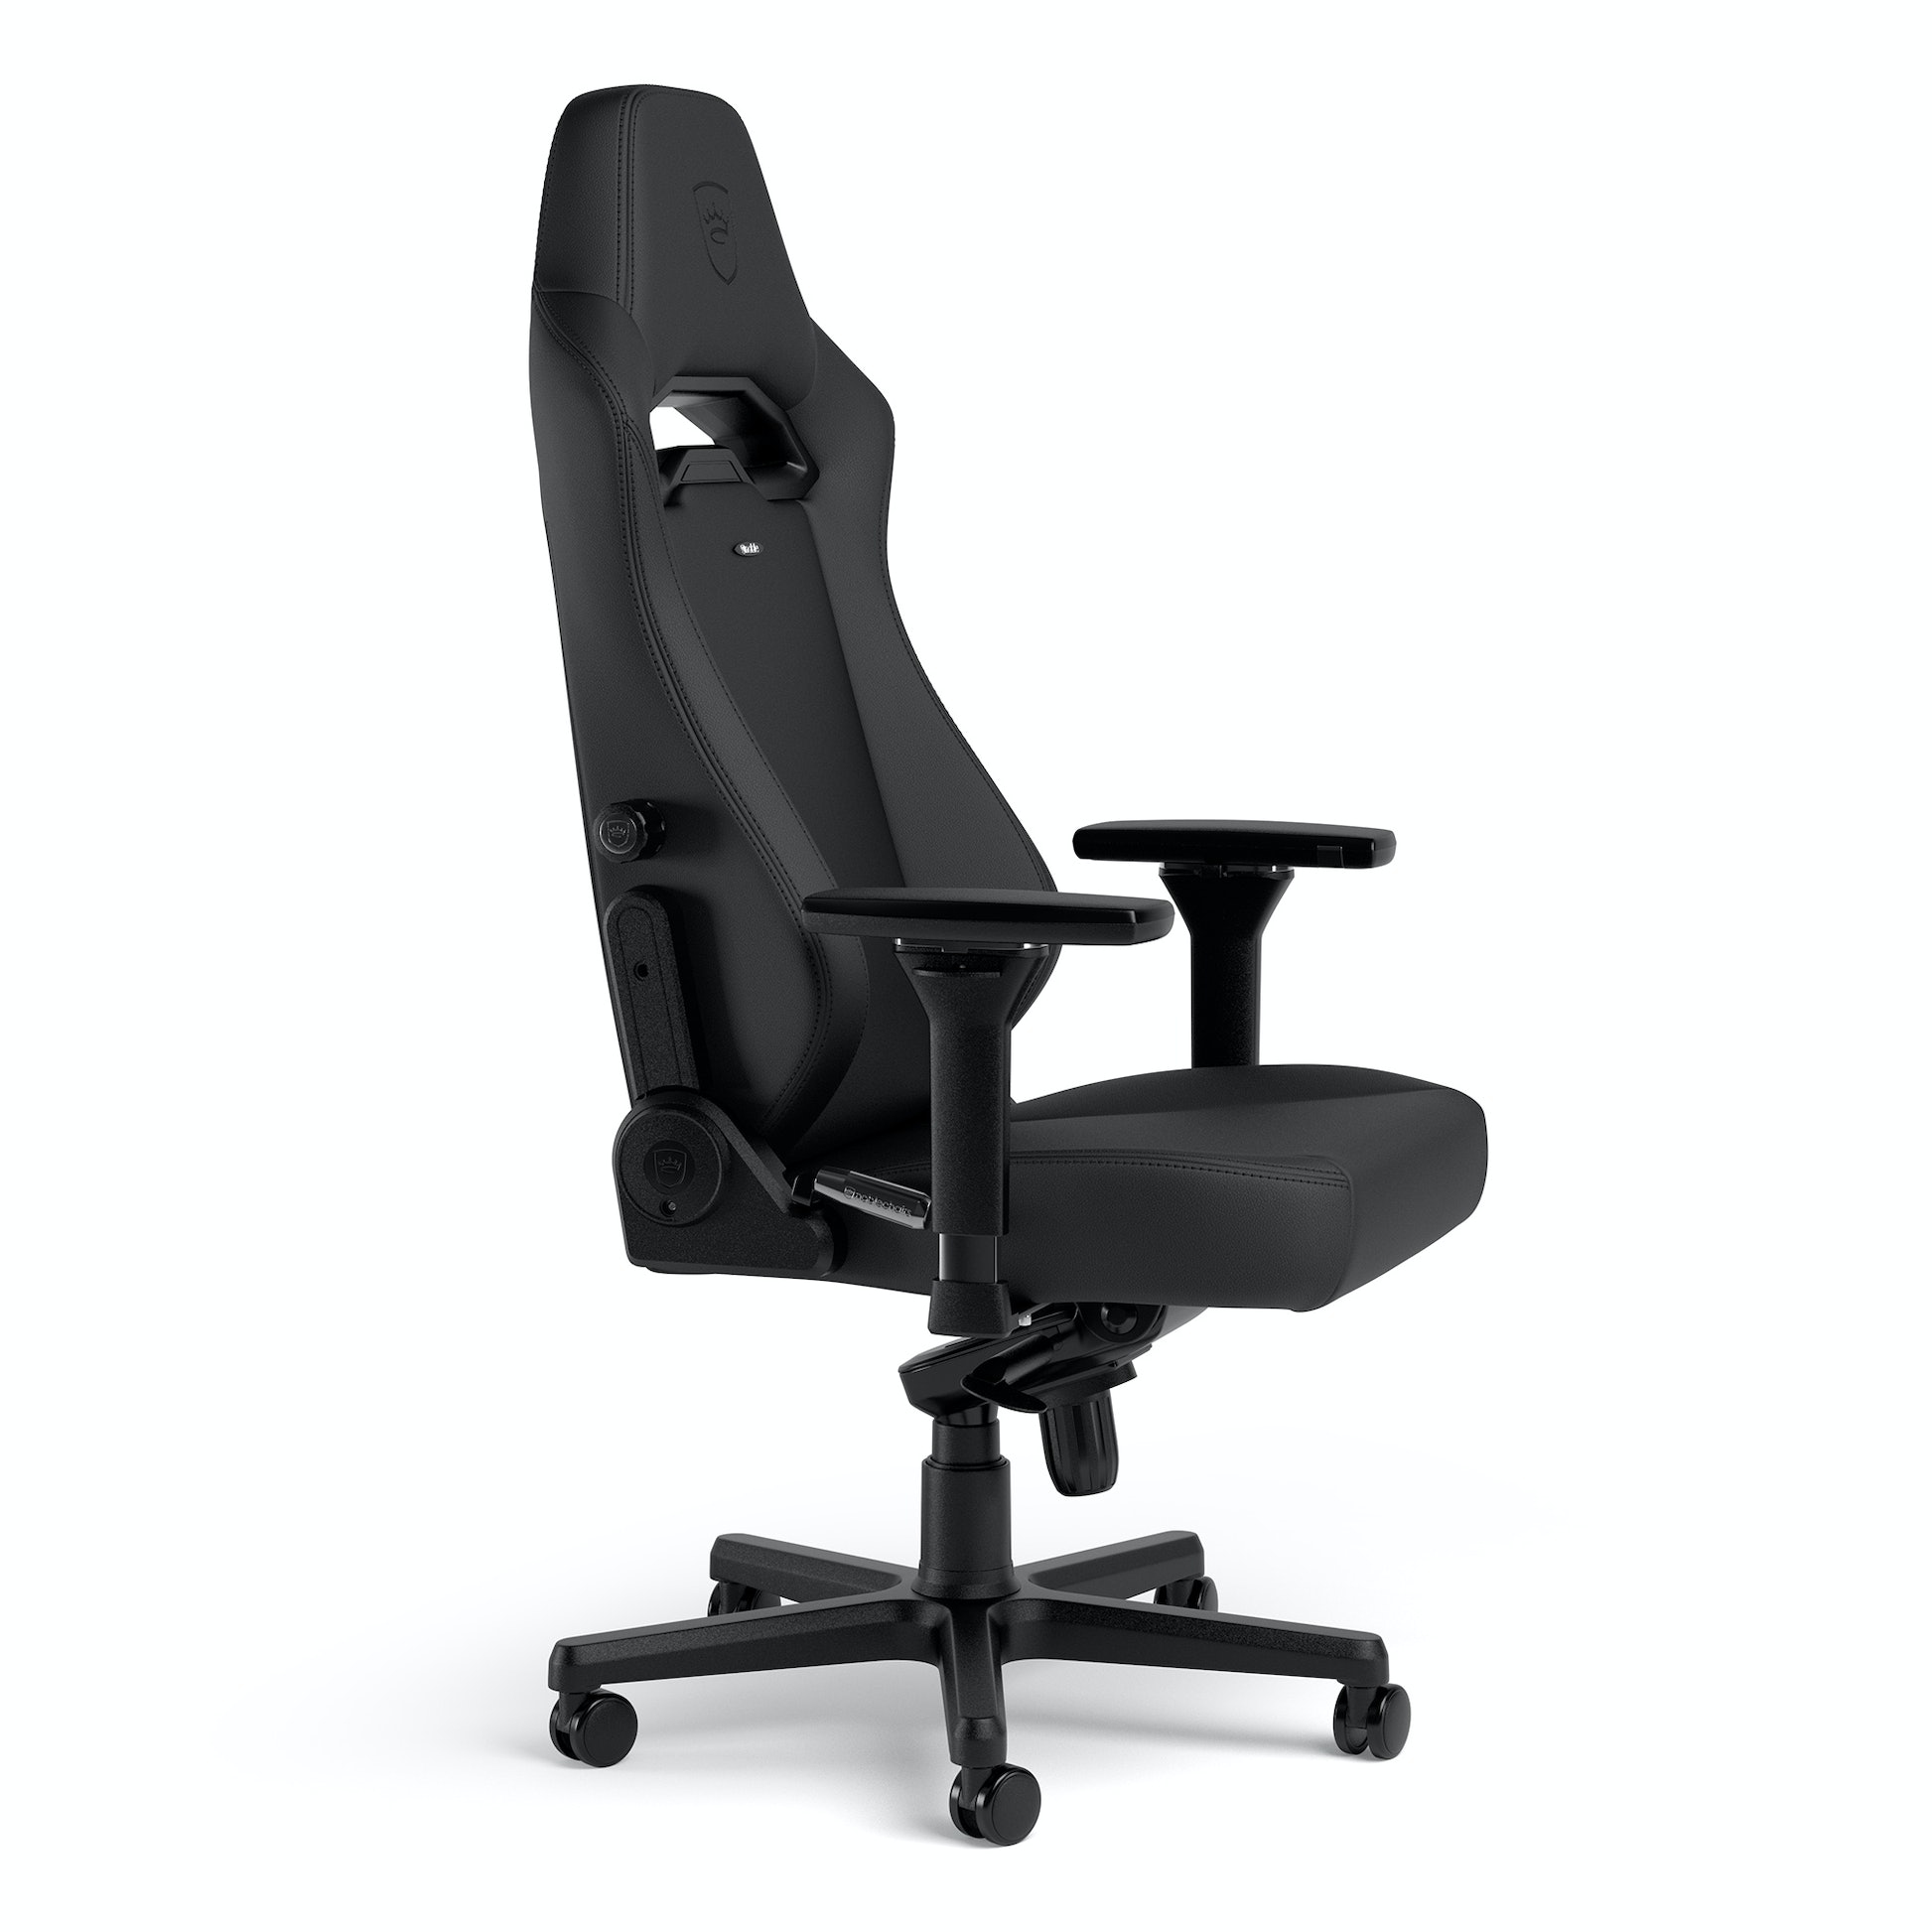 noblechairs - Cadeira noblechairs HERO ST - Black Edition